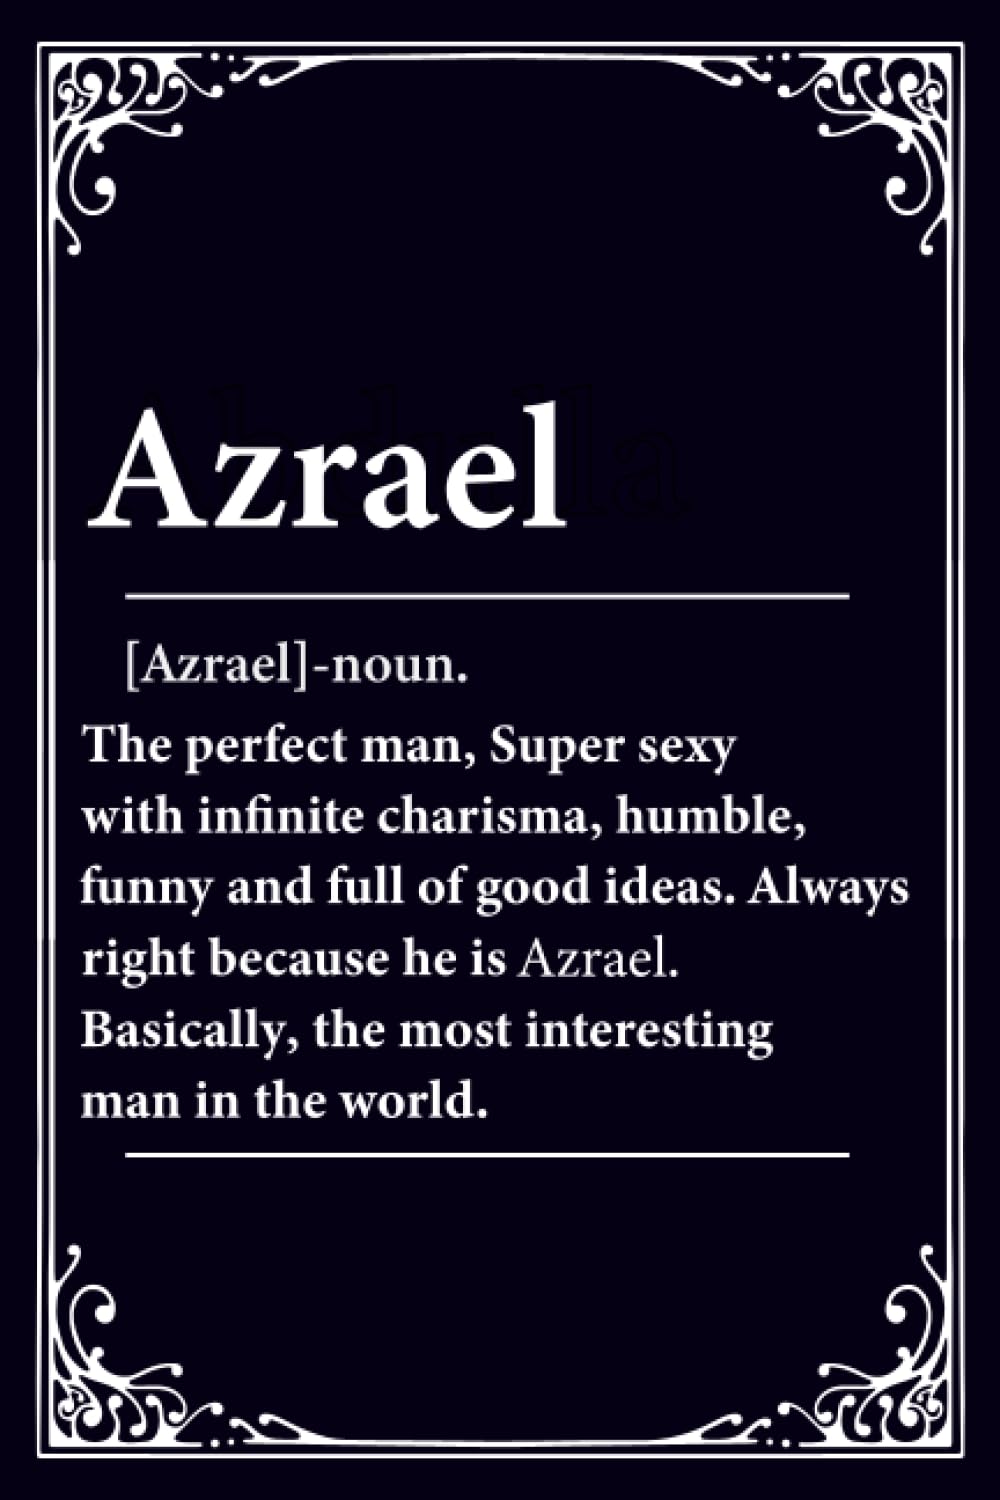 Azrael Definition: Azrael Notebook / Journal, Cute Personalized Notebook for Men Named Azrael | 100 6x9 blank Daily Diary for School, Travel, Business, Work, Home Writing For boy and men.